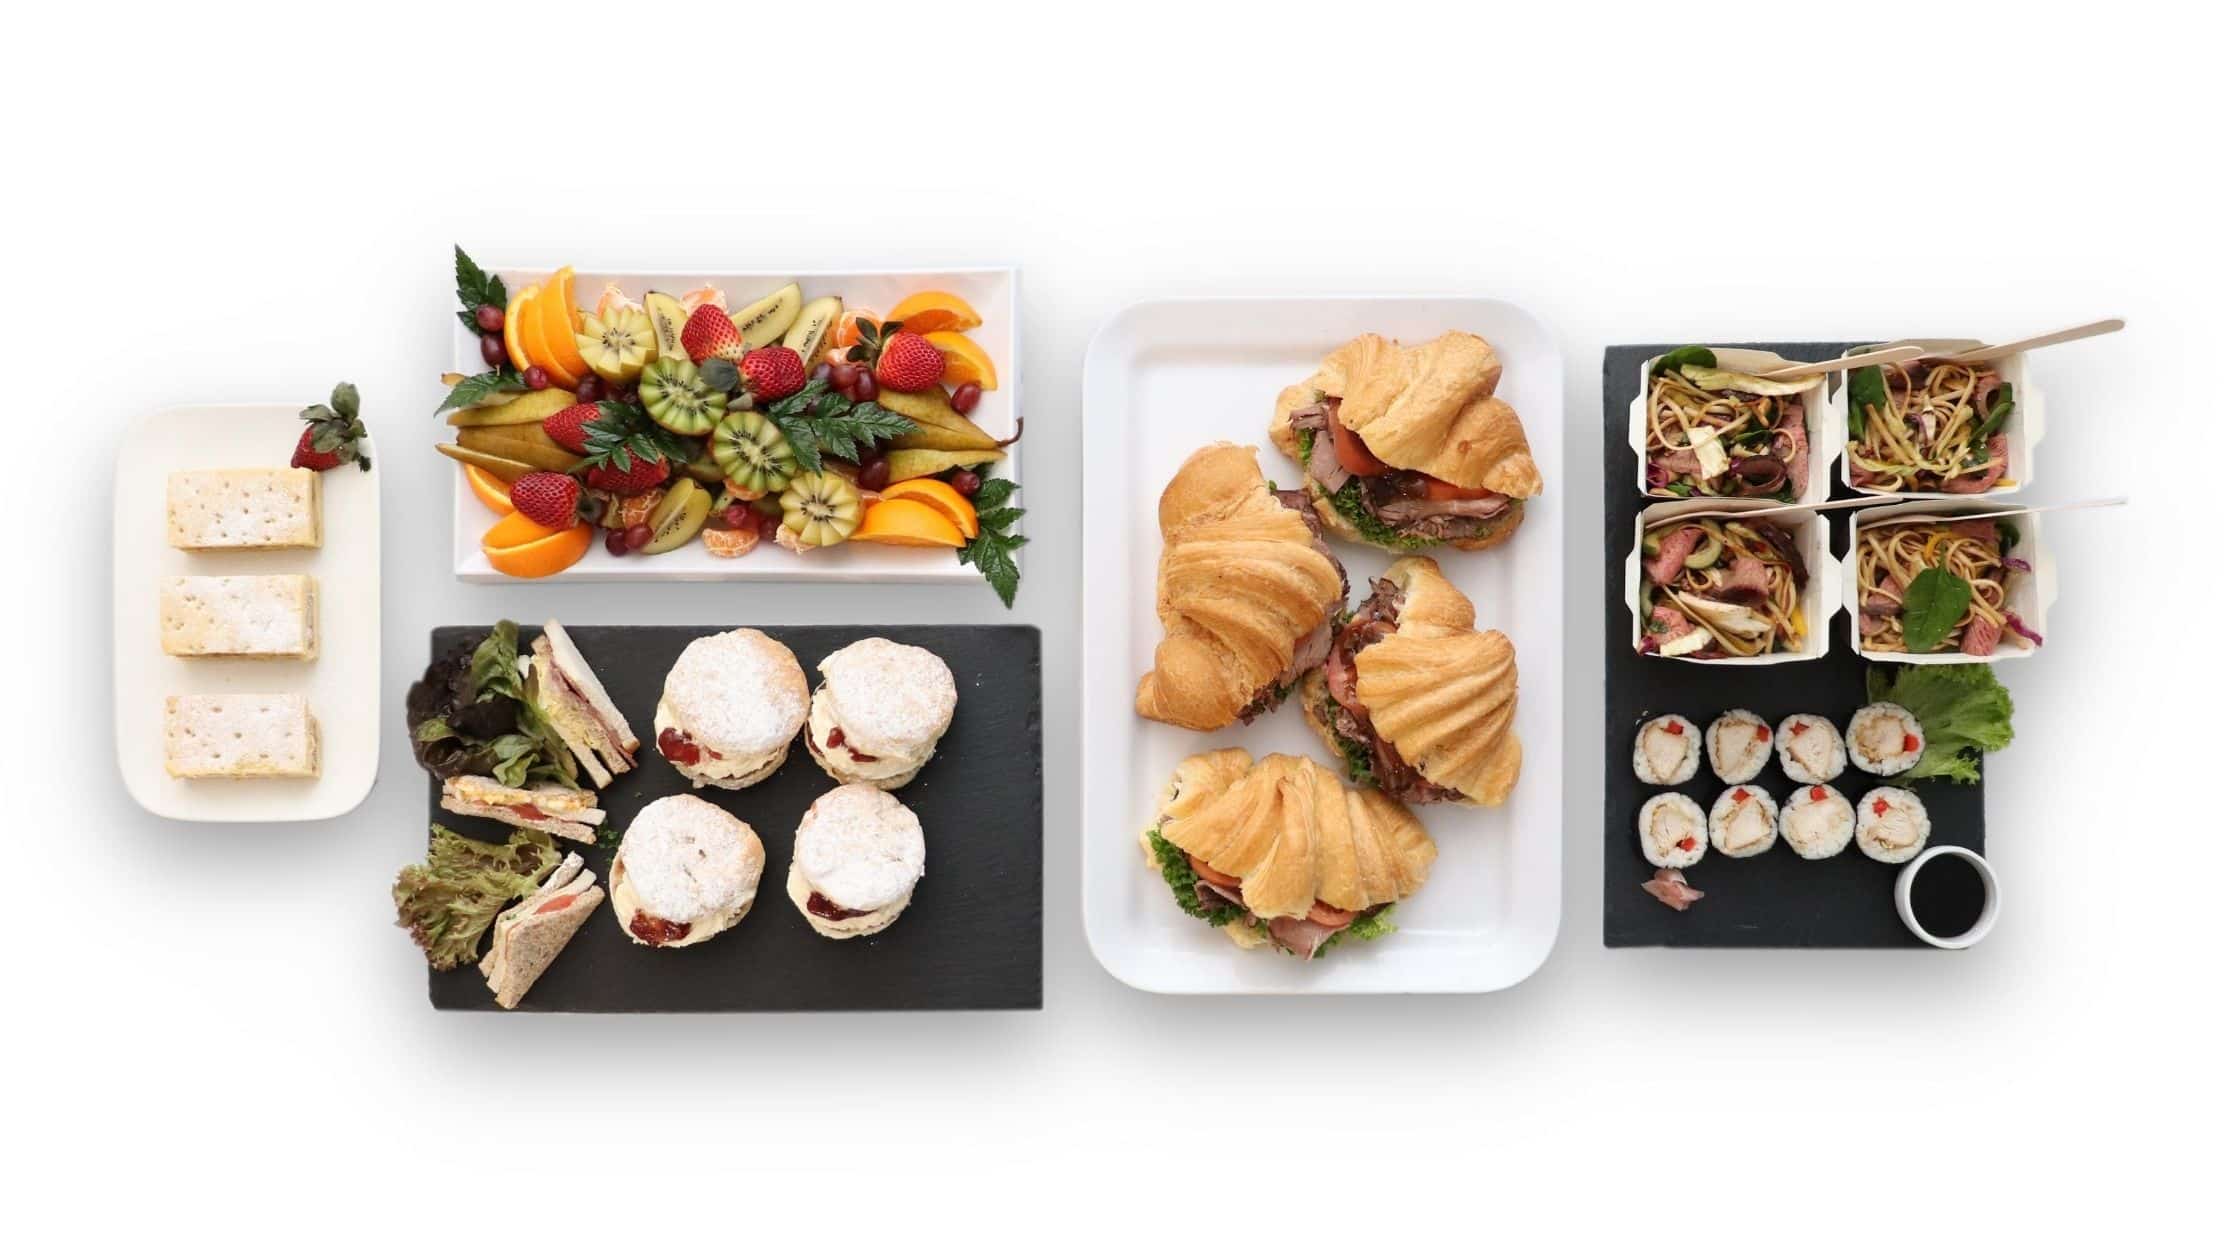 Have a self-serve table catering